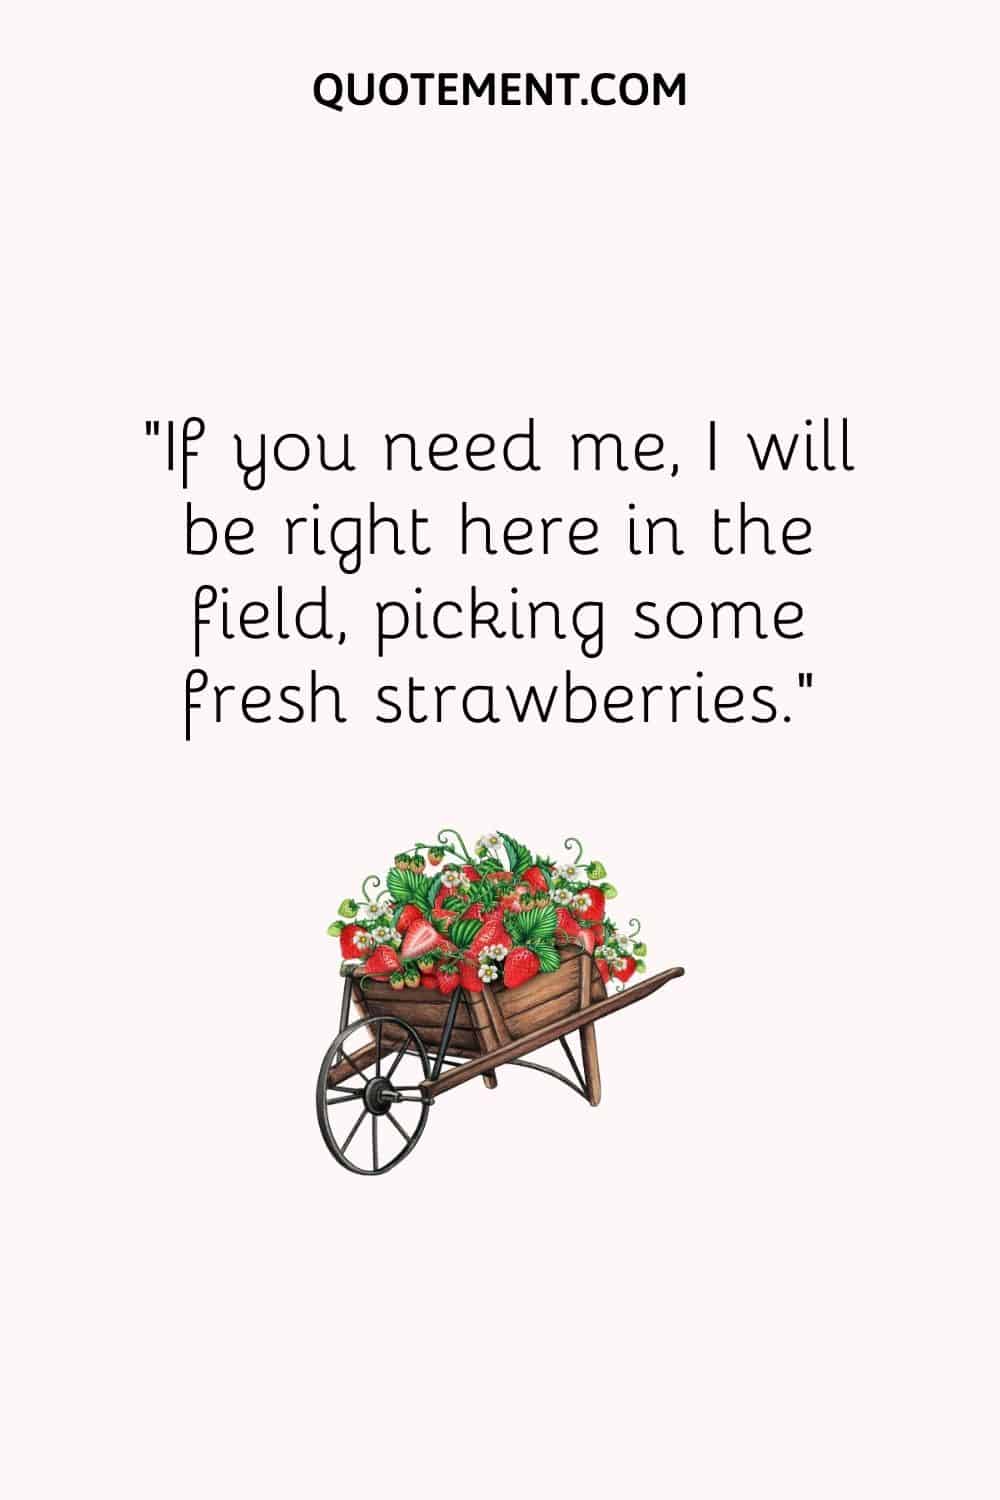 If you need me, I will be right here in the field, picking some fresh strawberries